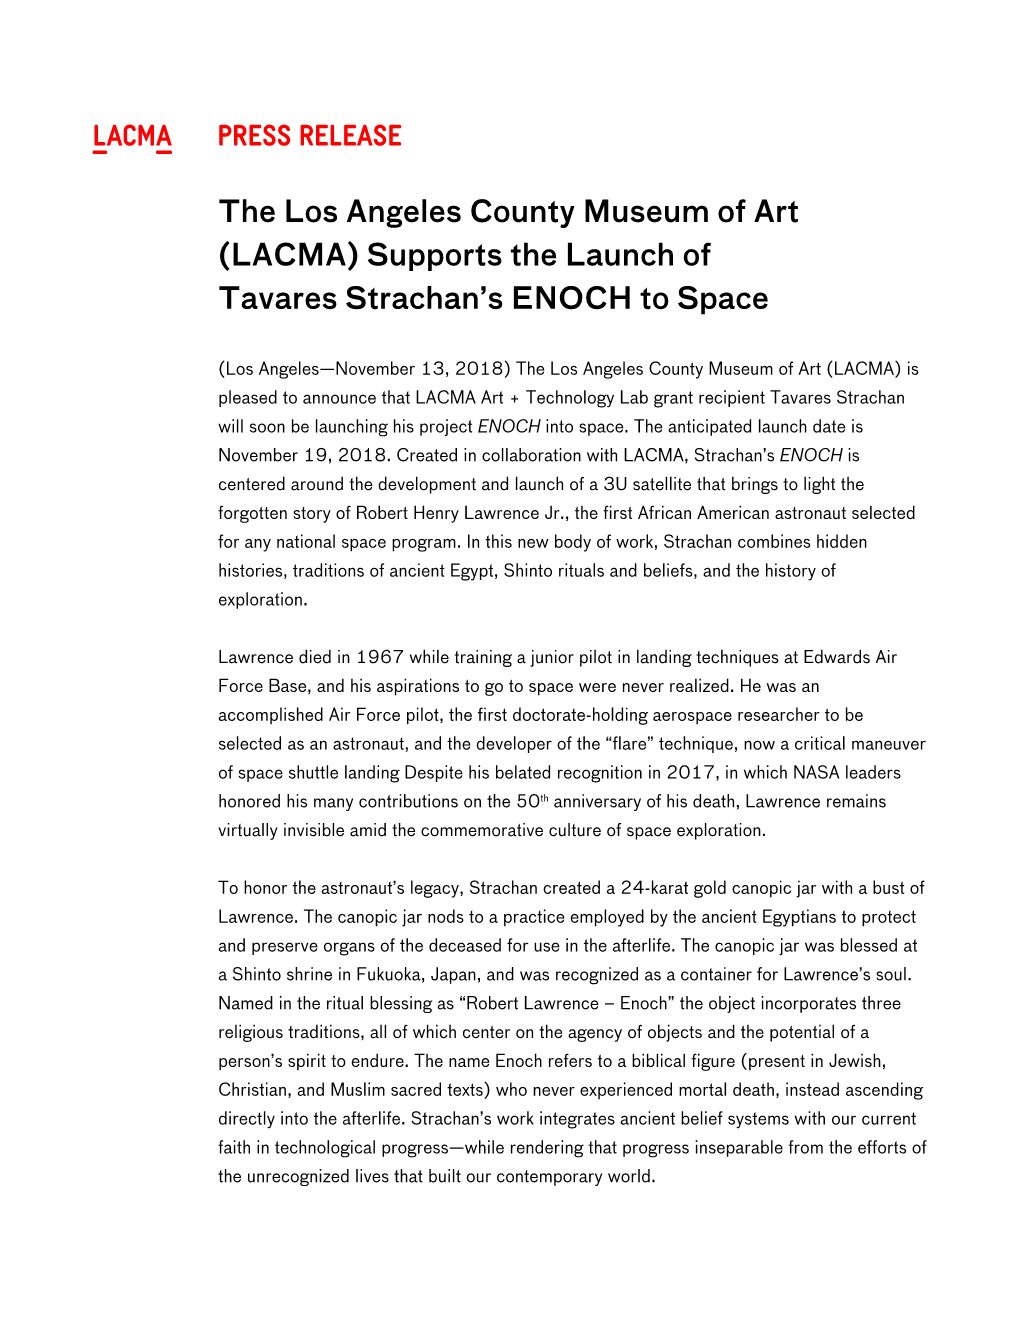 ^ Press Release the Los Angeles County Museum of Art (LACMA